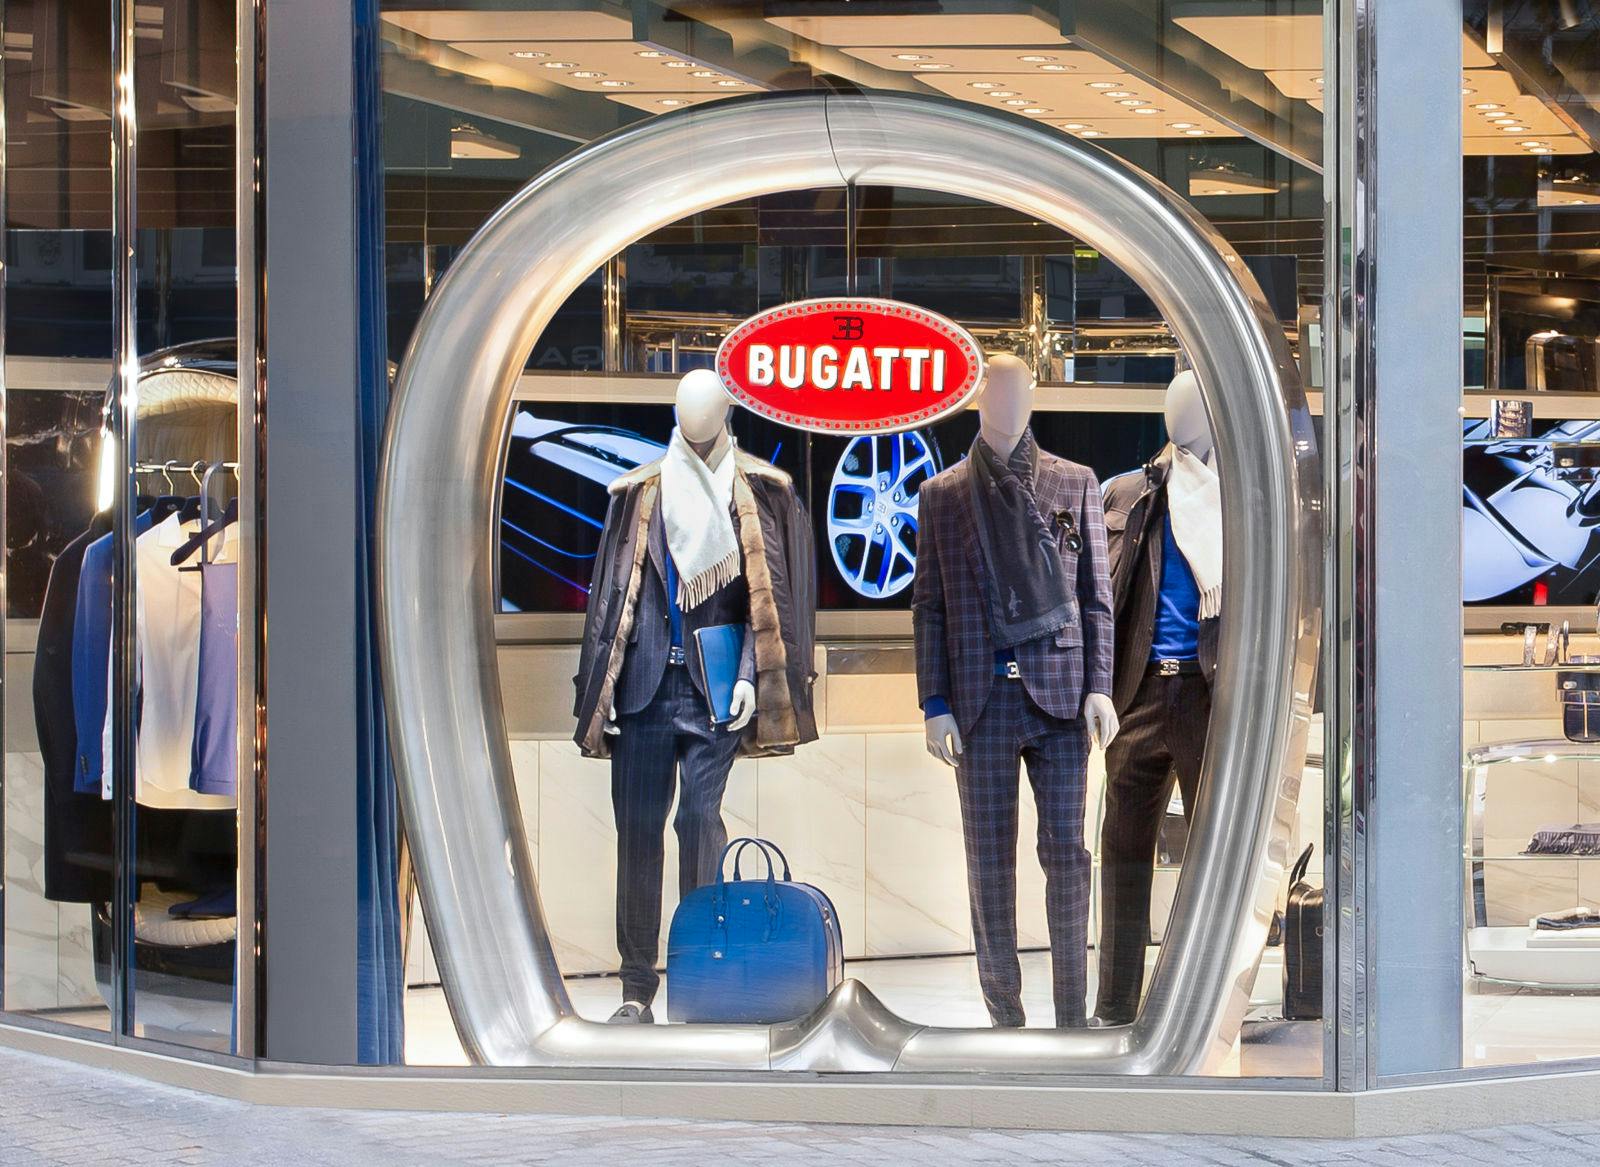 In keeping with the brand’s motto of “Art, Forme, Technique”, the new Bugatti boutique at 24-26 Brompton Road conveys Bugatti’s exceptional technical performance and the exclusive luxury of the brand. Even from a distance the three-metre aluminium arch featuring the Bugatti logo is a truly eye-catching feature. It was modelled on the most distinctive design feature of all Bugatti cars – the famous horseshoe-shaped radiator grille.